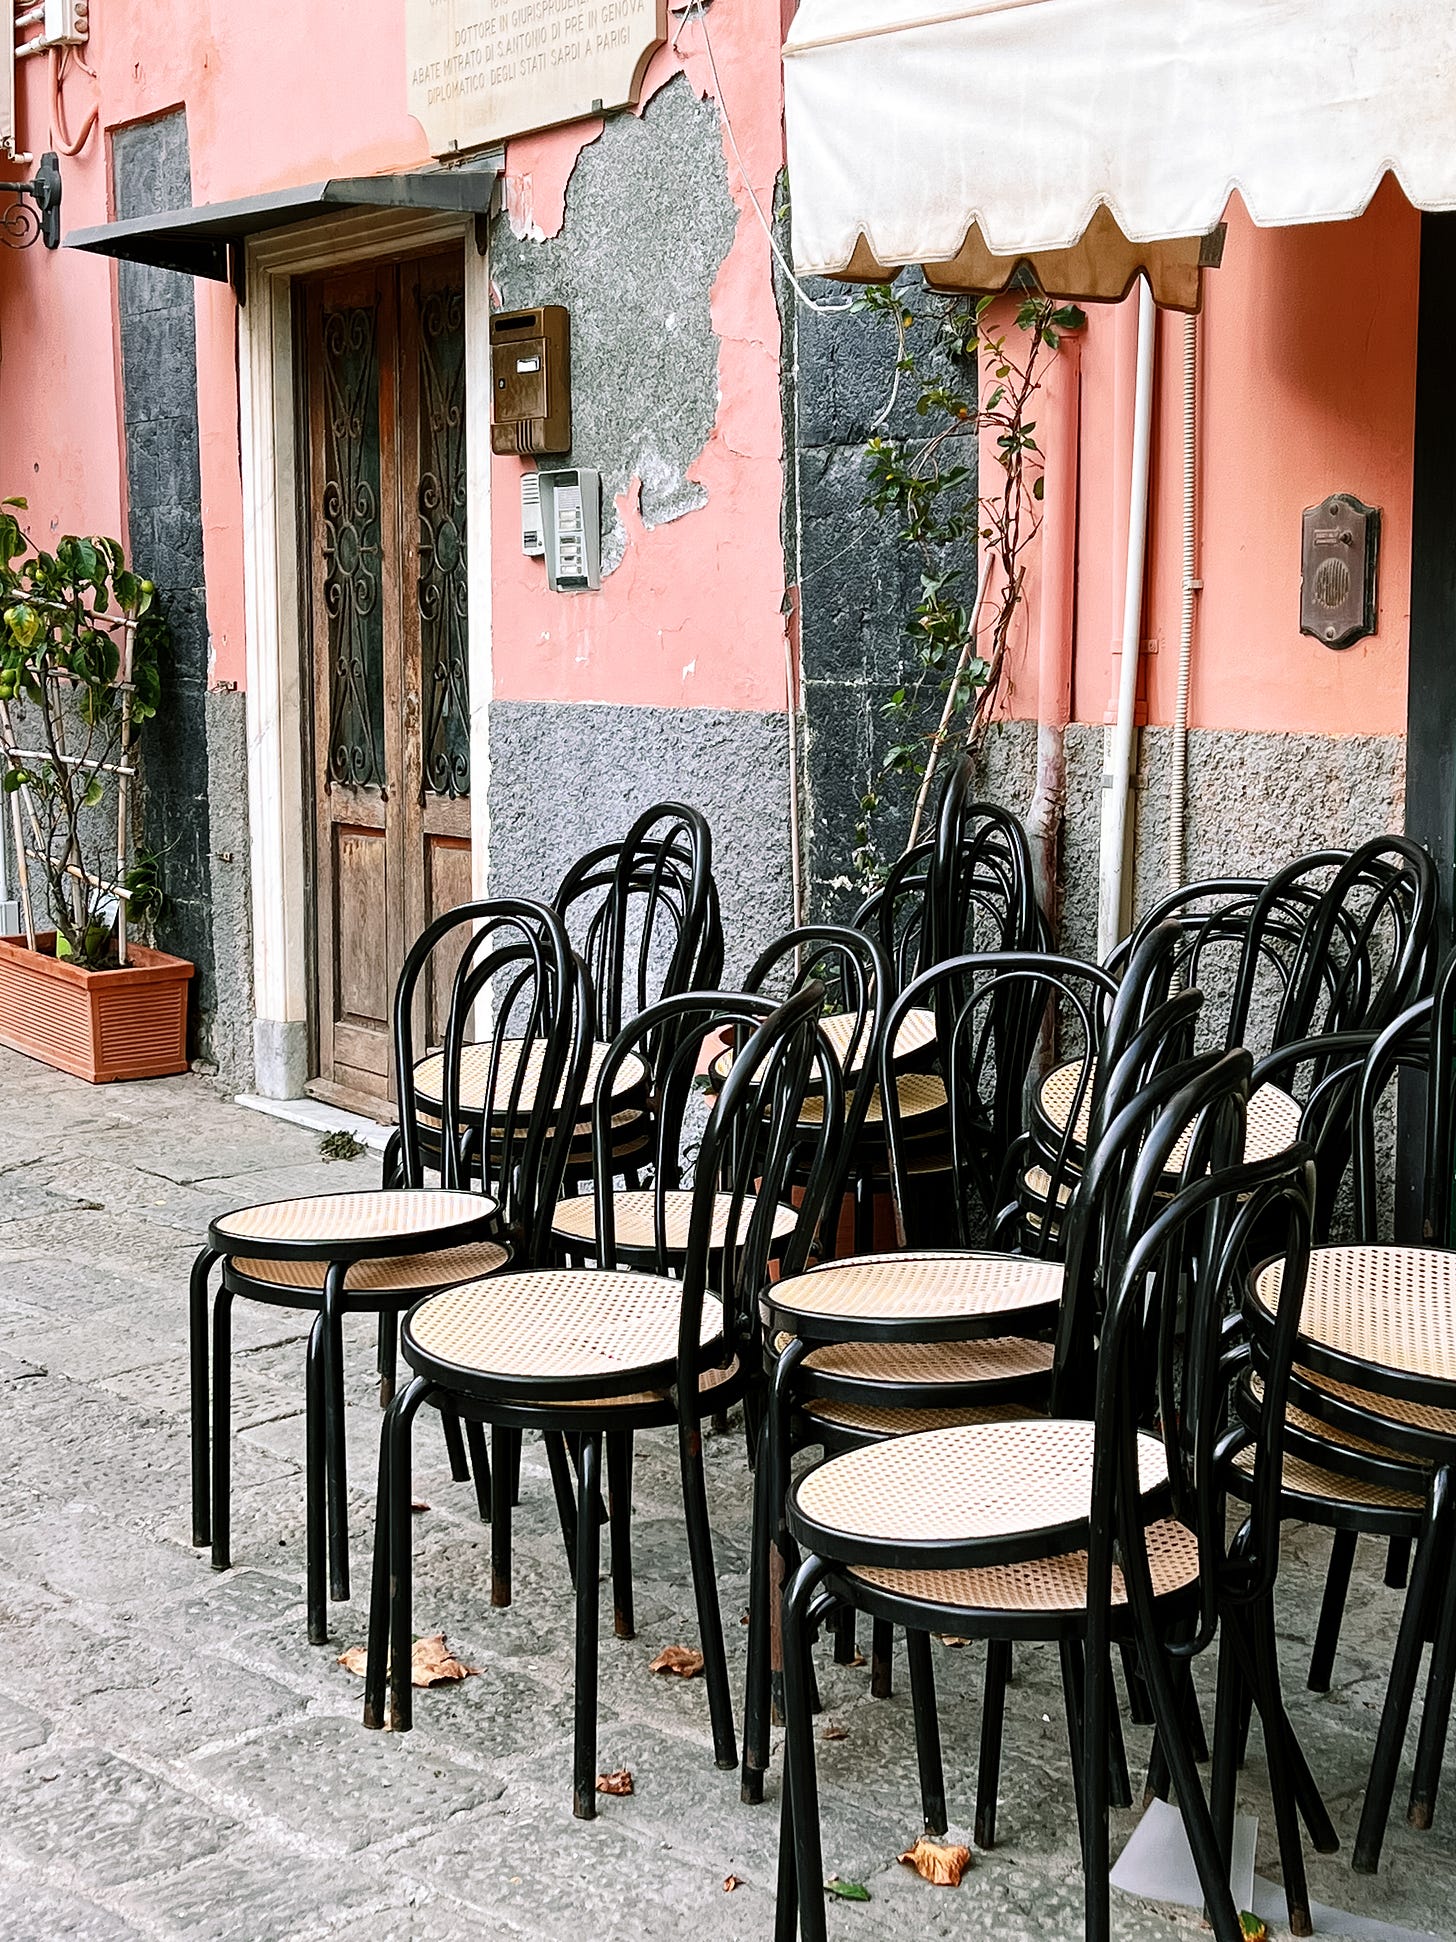 Cafe chairs stacked outside of a pink building in Monterosso al Mare